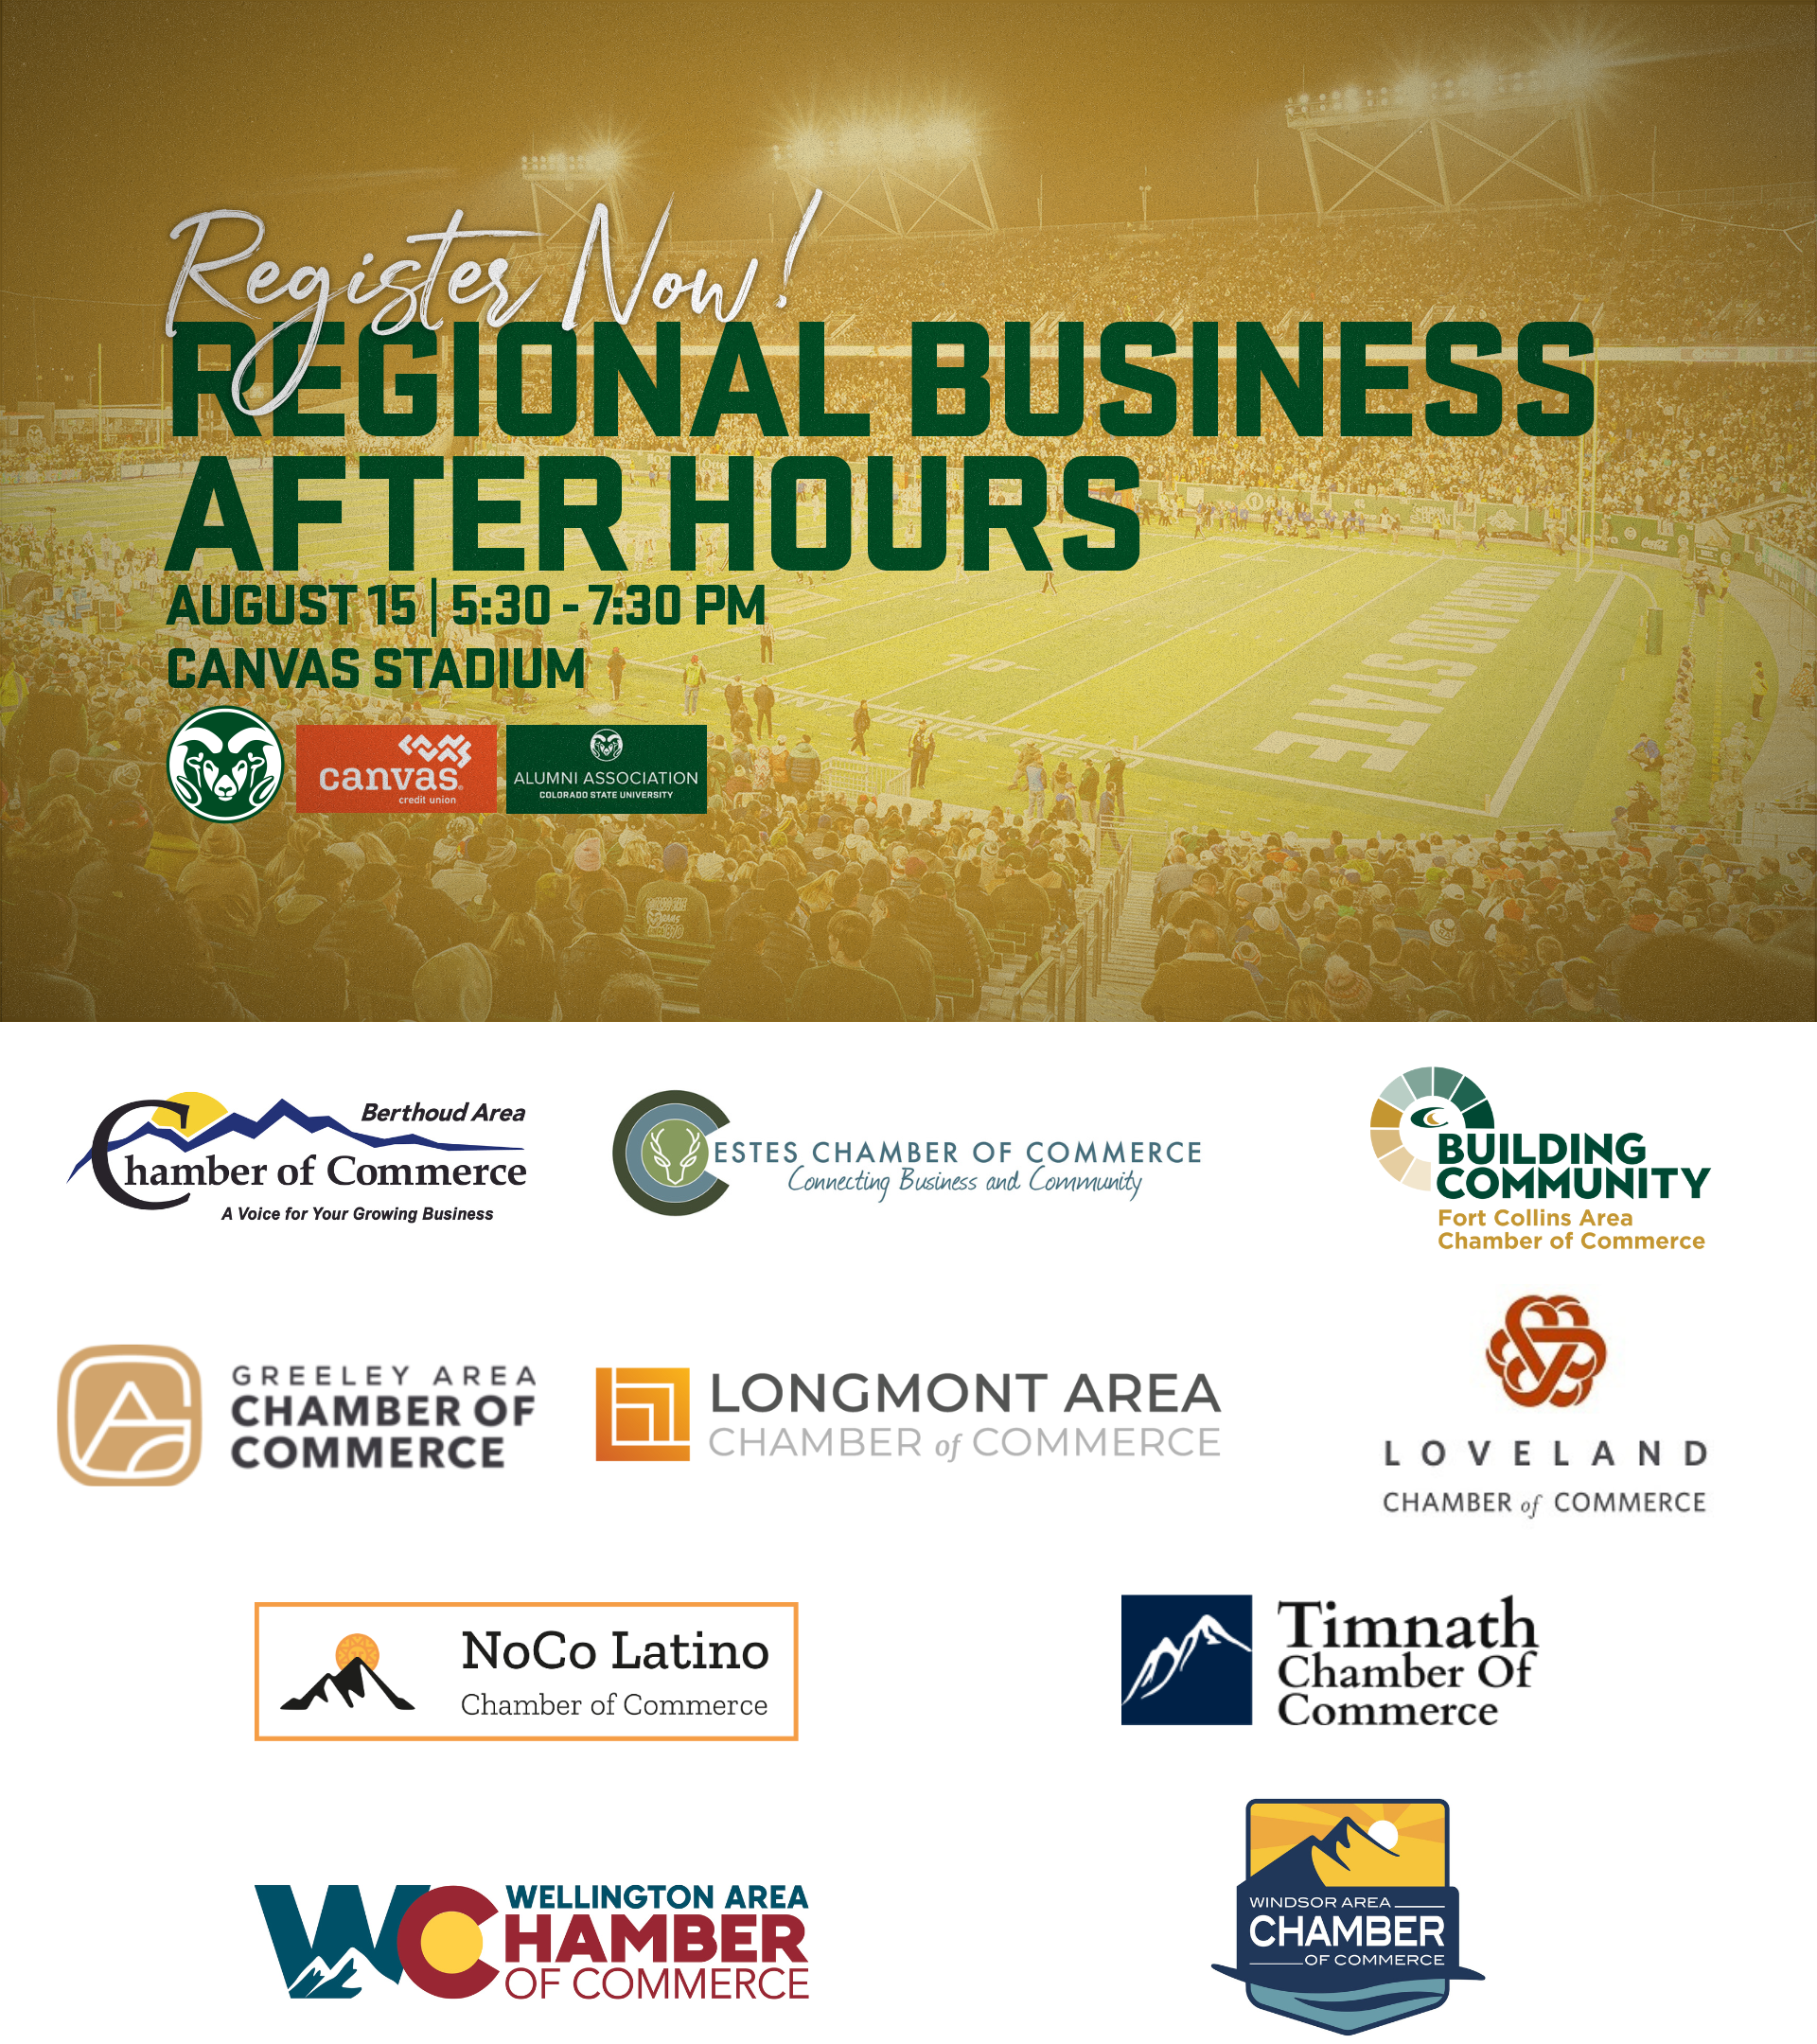 Regional Business After Hours Event Flyer